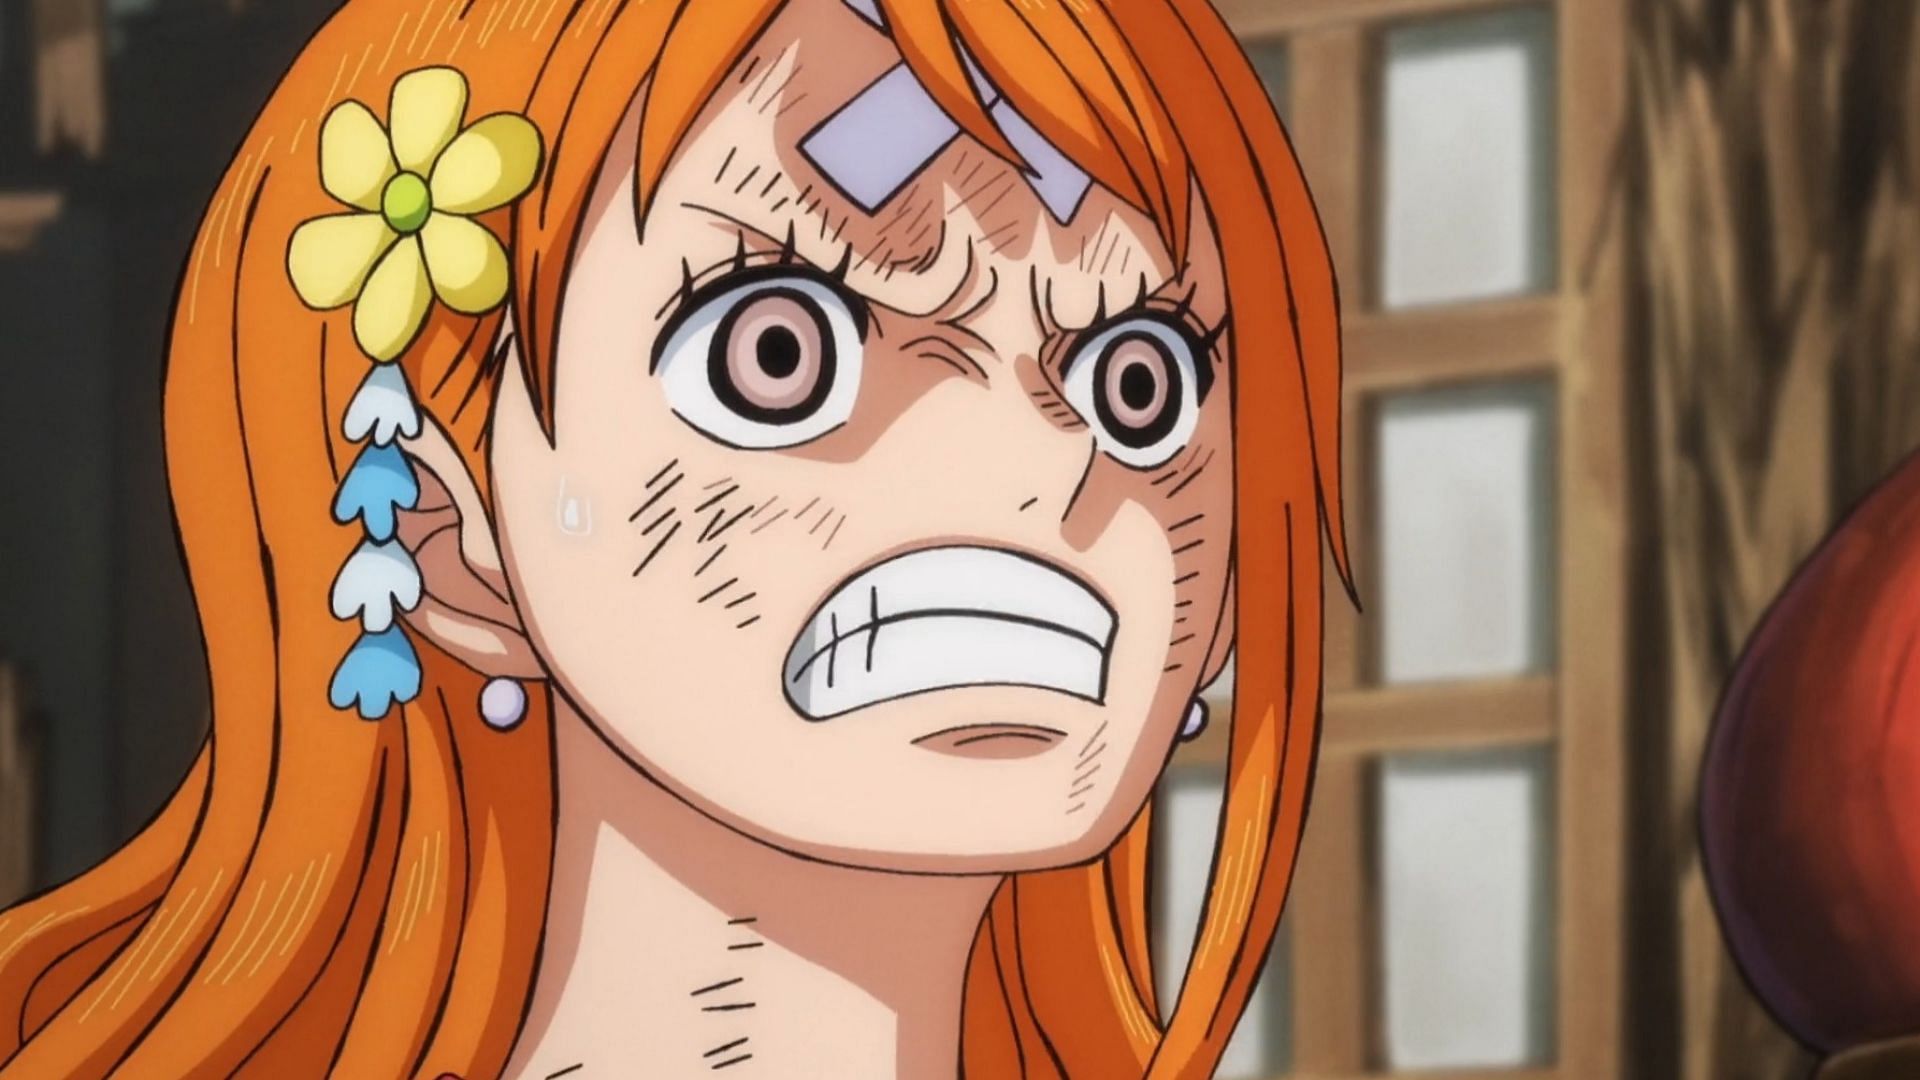 Nami Cries After Luffy's Death - One Piece 1070 (Eng Sub) 1080p